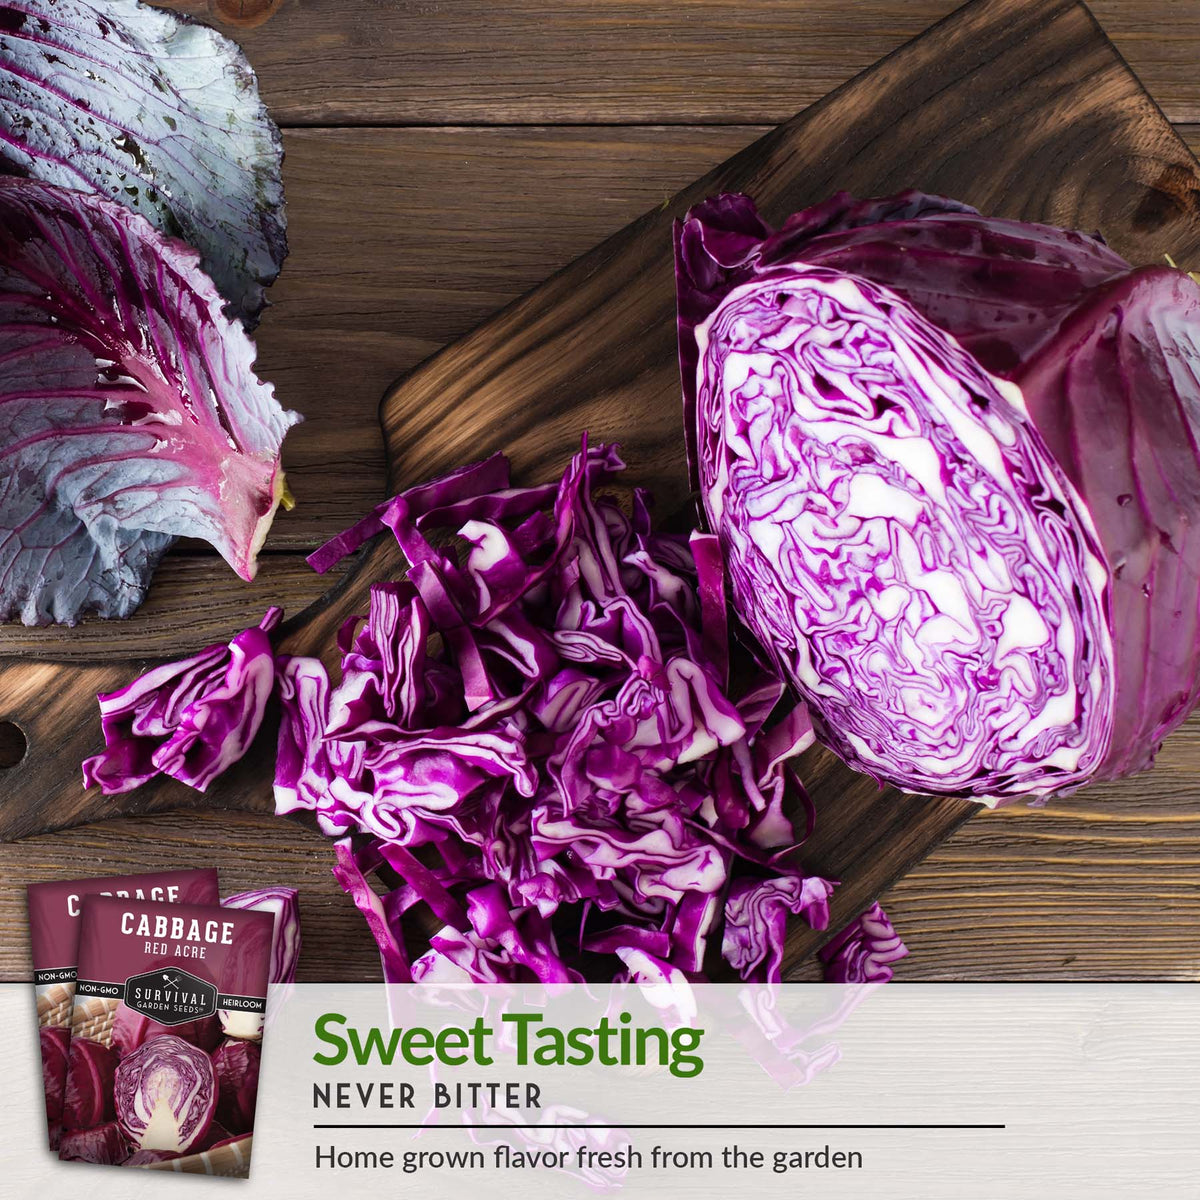 Red Acre Cabbage is sweet tasting never bitter